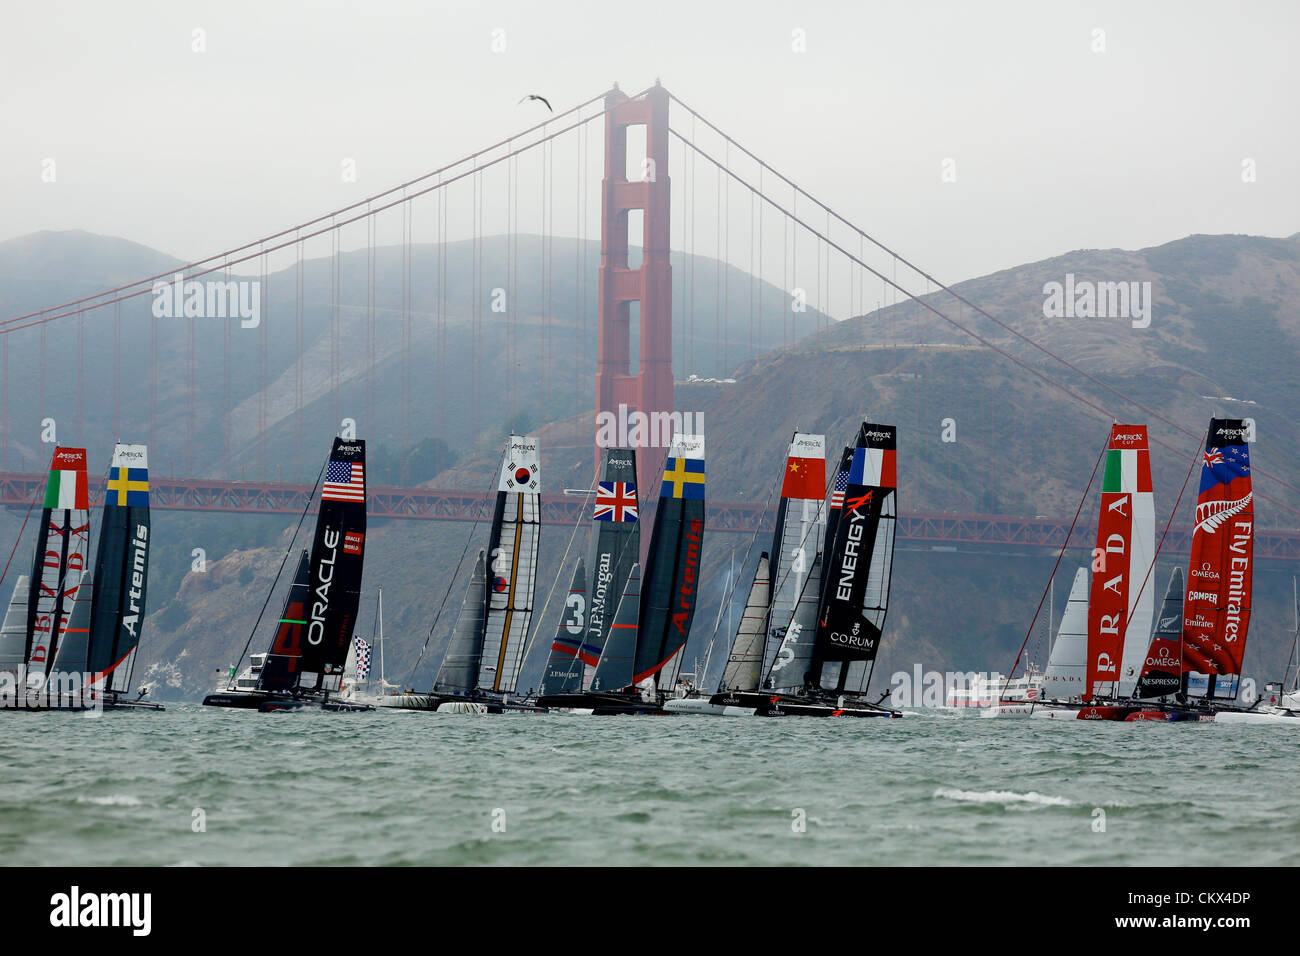 Aug. 25, 2012 - San Francisco, California, U.S - America's Cup World Series, San Francisco, CA August 25, 2012.  Last Fleet  Heat on day 4 at the Starting line with  the Golden Gate Bridge in the background.  ORACLE TEAM USA SPITHILL (Jimmy Spithill) wins the race  (Credit Image: © Dinno Kovic/ZUMAPRESS.com) Stock Photo